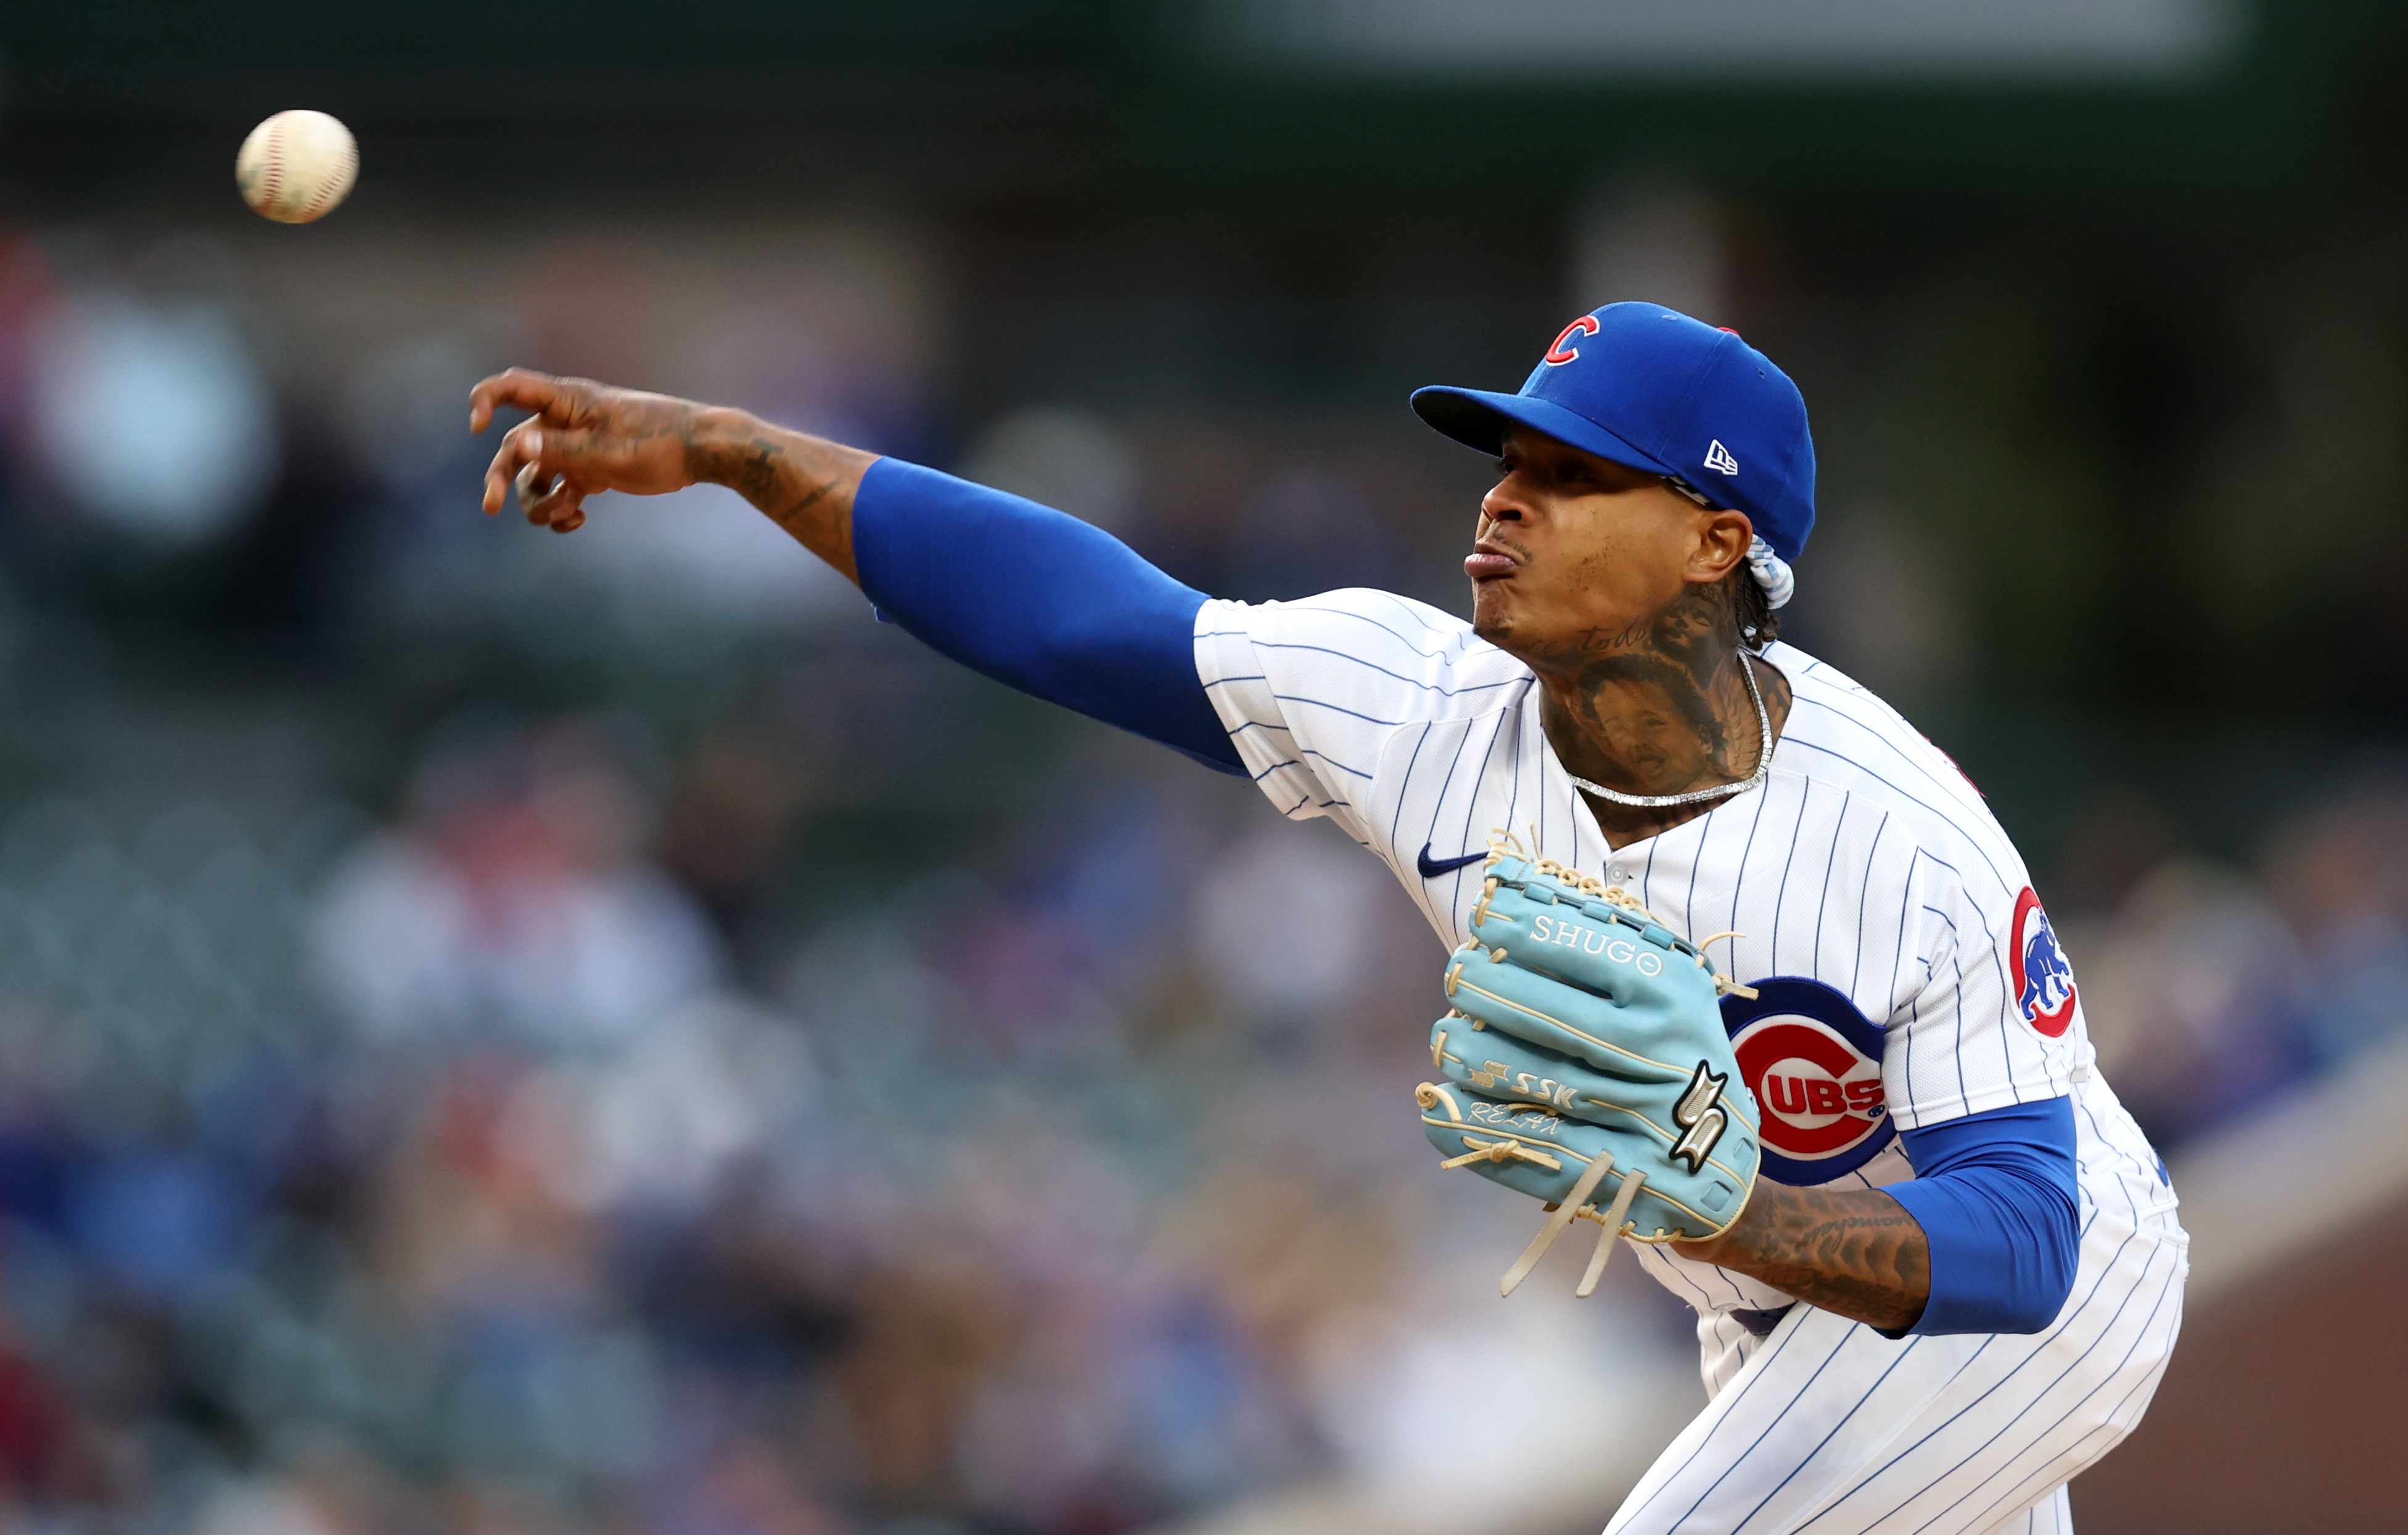 Marcus Stroman pitches well again, Chicago Cubs can't complete sweep vs  Mariners